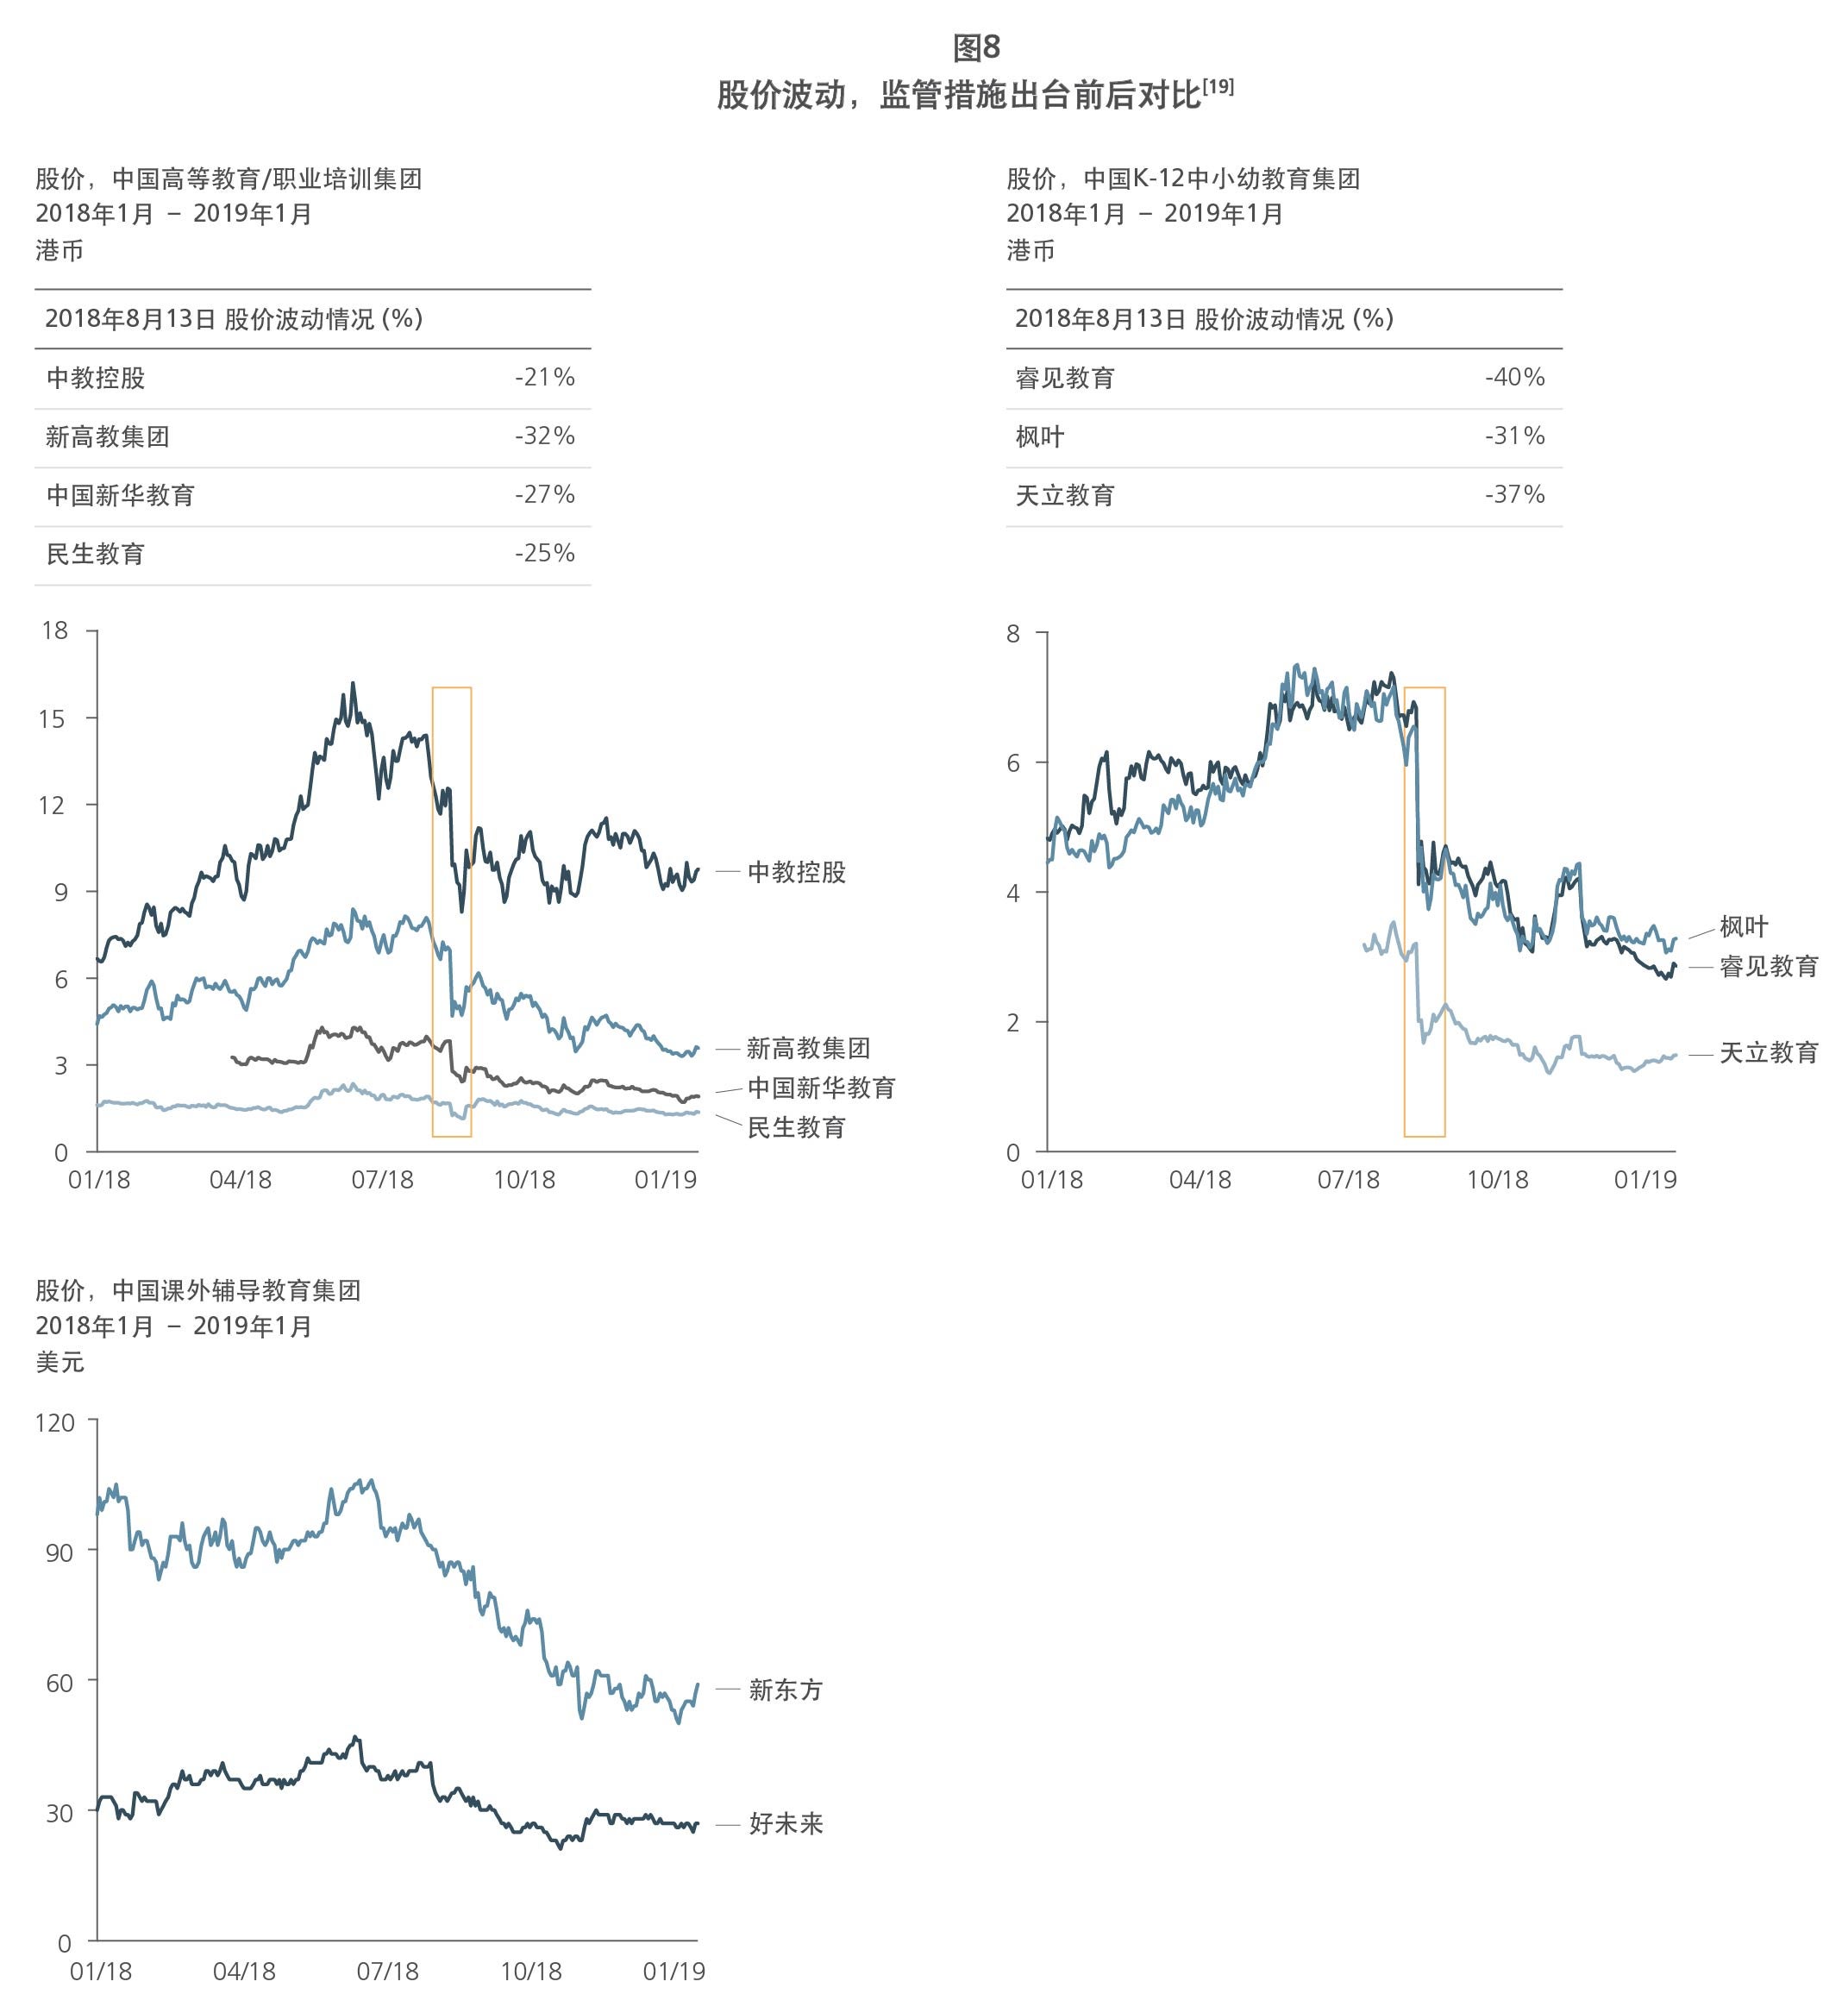 Stock price variation before and after regulatory announcements